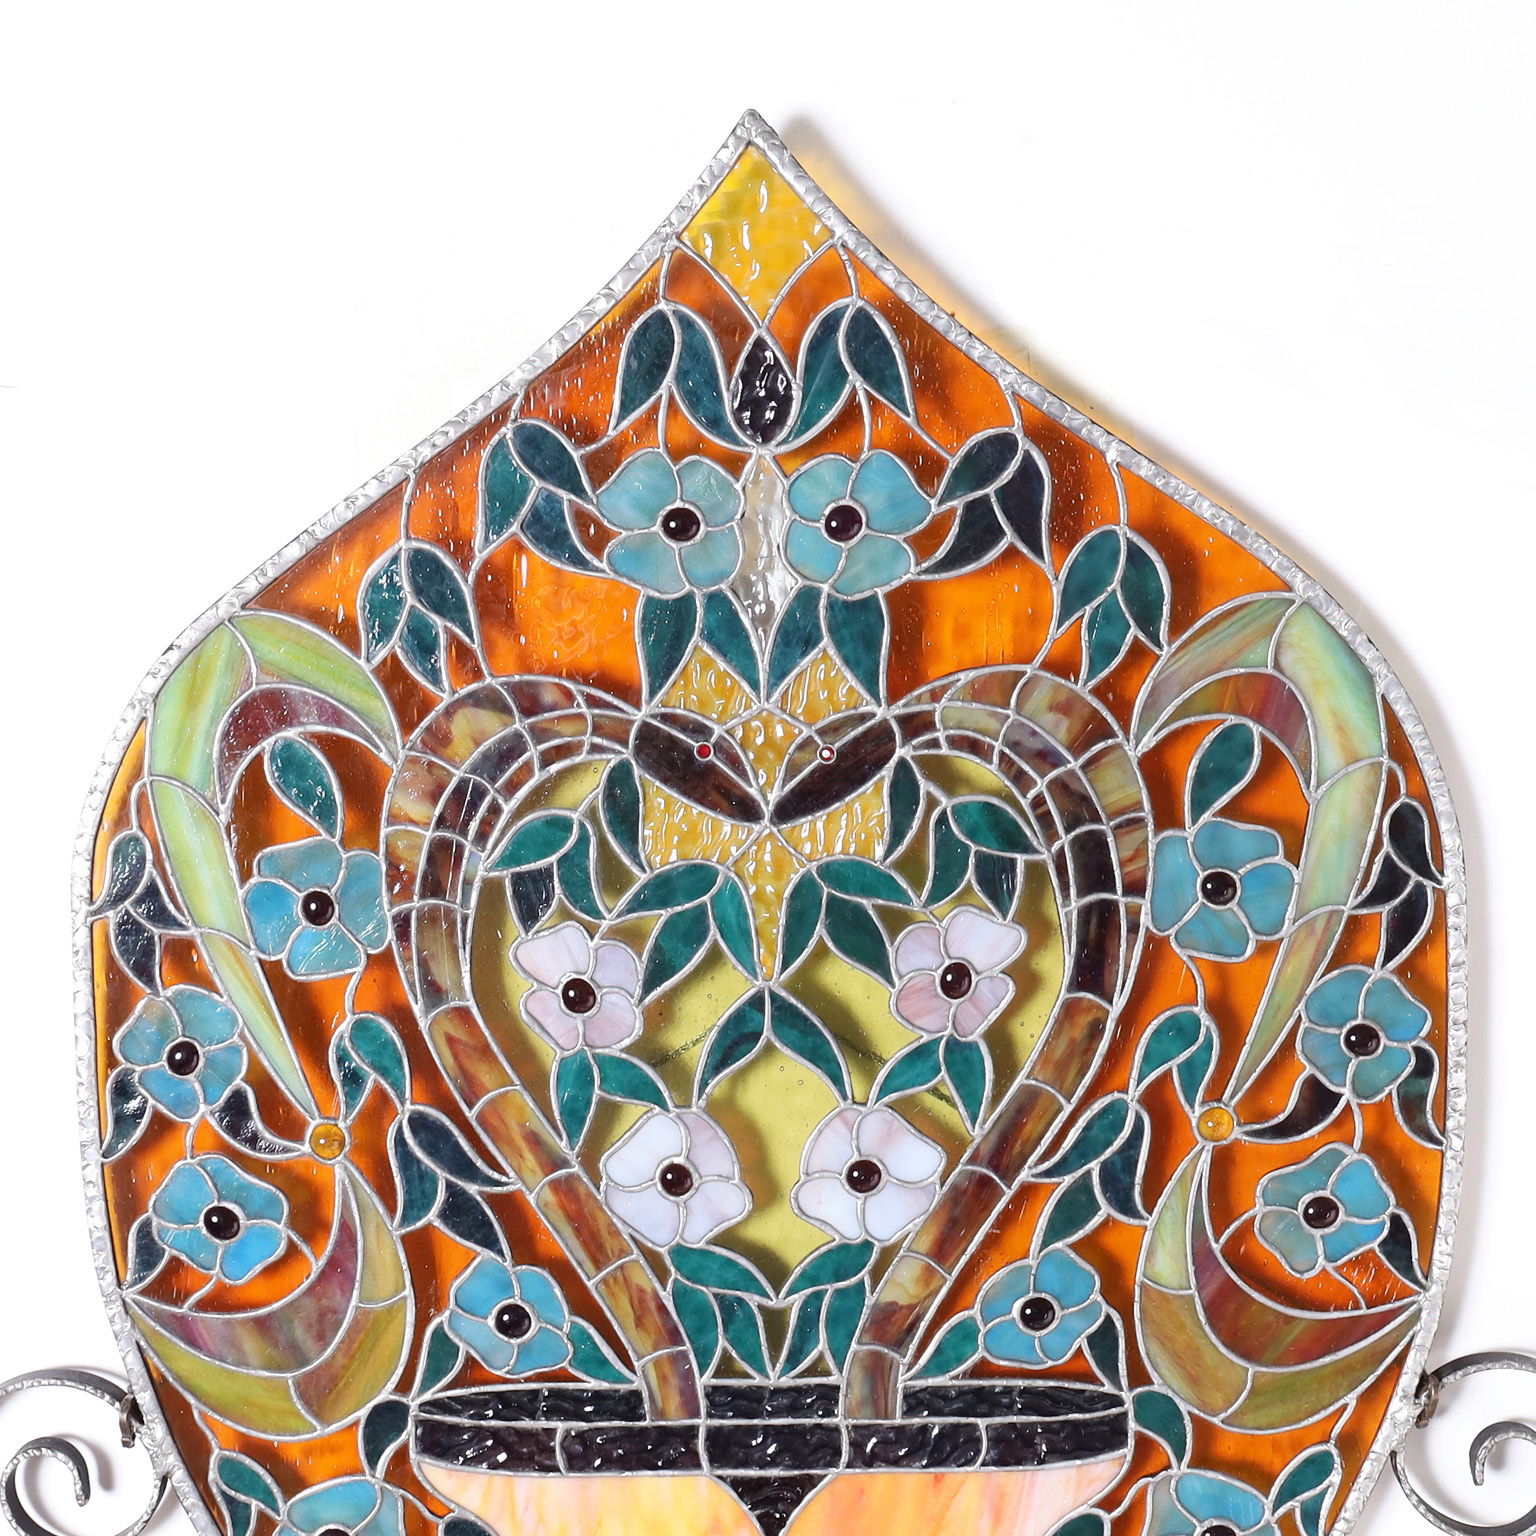 Jeweled Stained Glass Garden Window with a Floral Motif